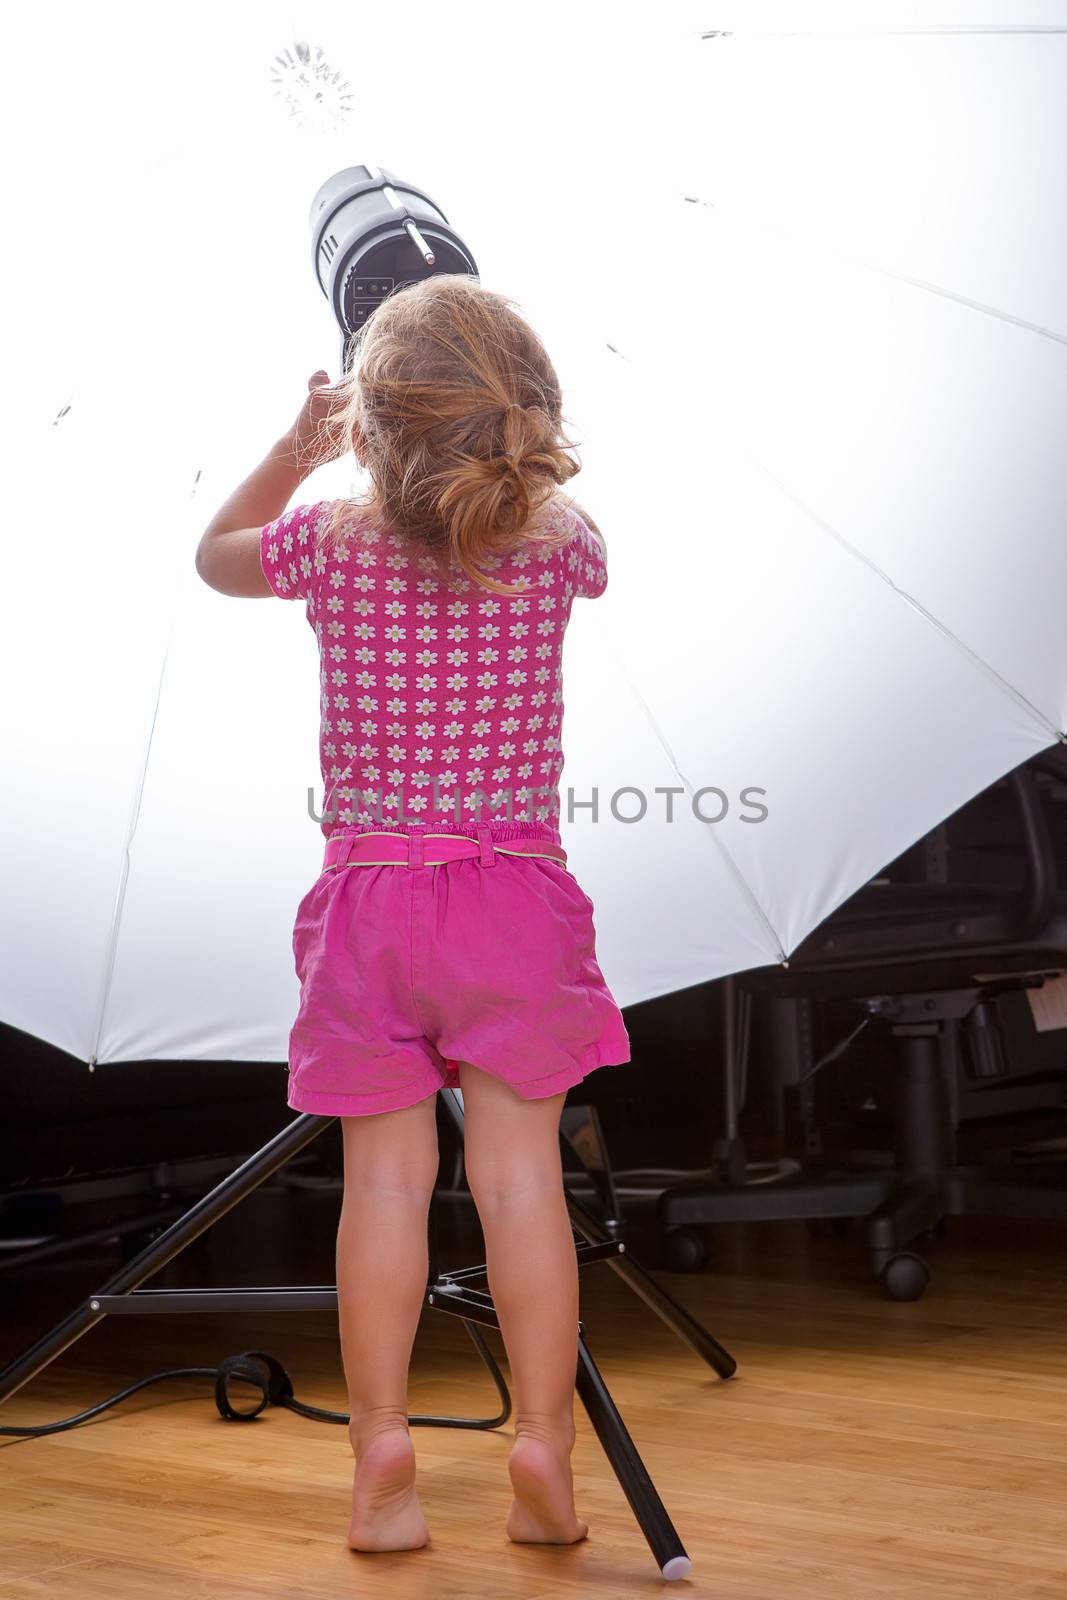 Little mischievous toddler girl at the Studio adjusting the Strobes settings on her toes